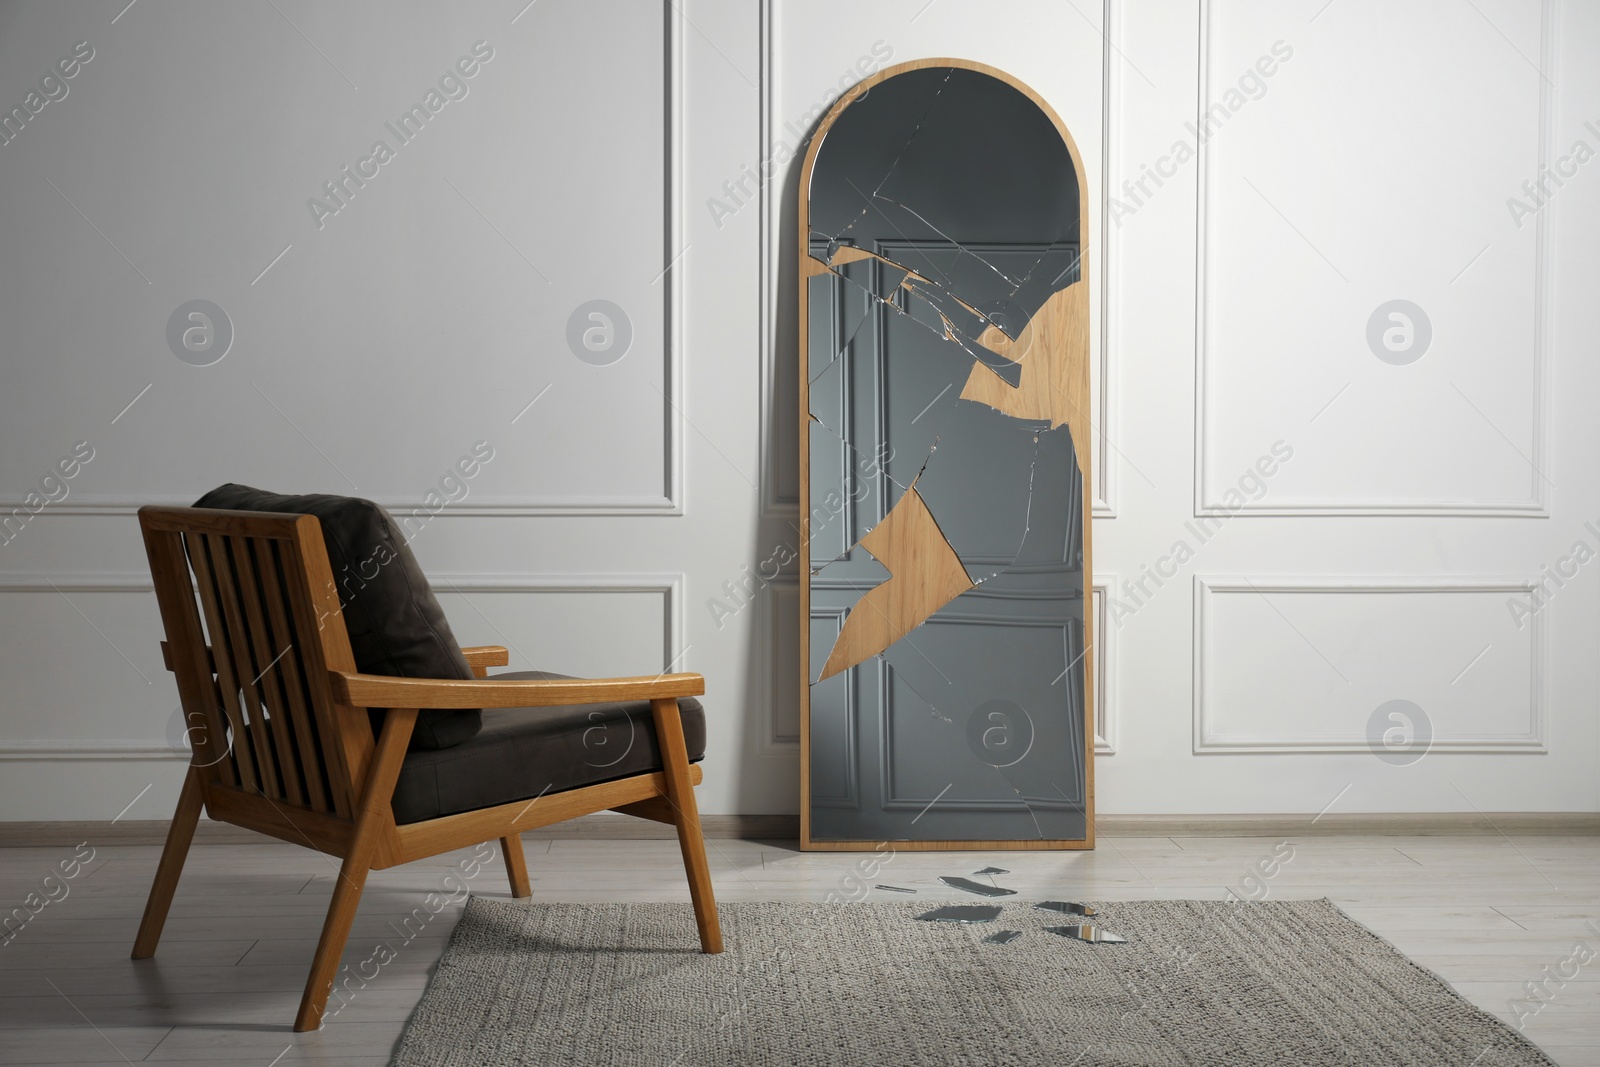 Photo of Broken mirror with many cracks and armchair in room